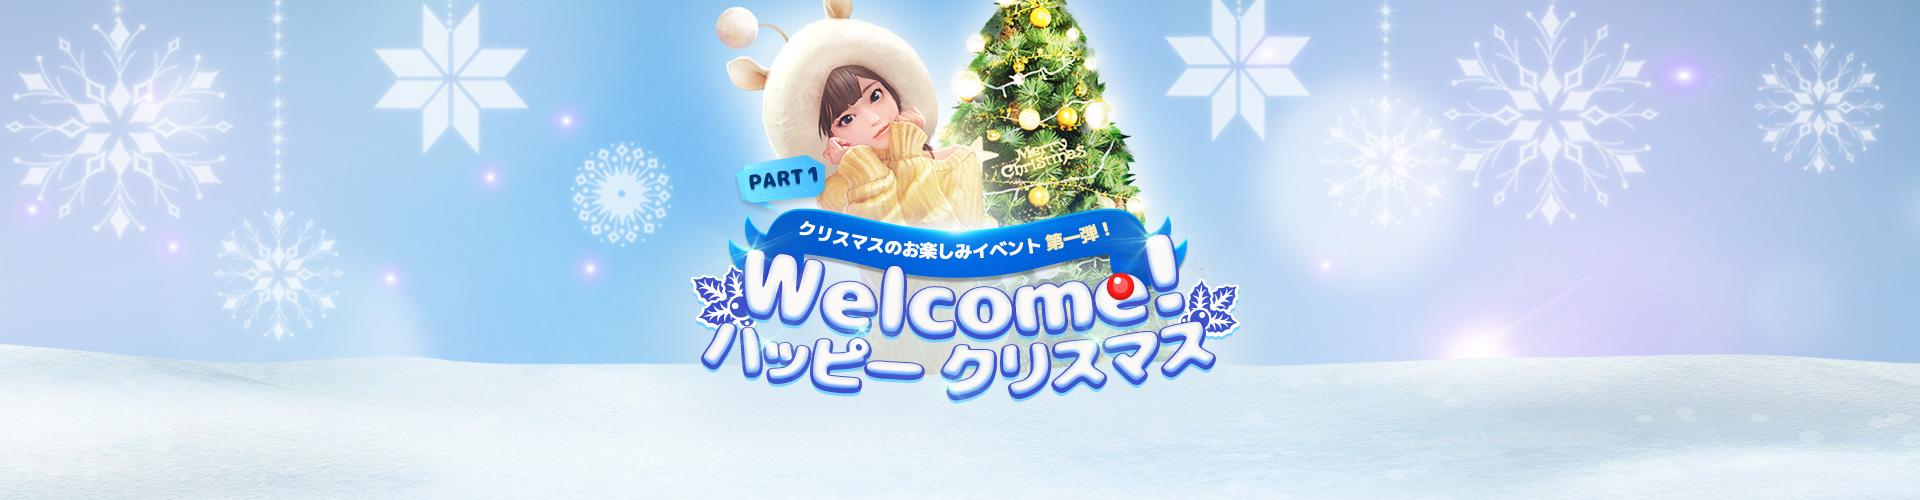 Welcome！ハッピークリスマス